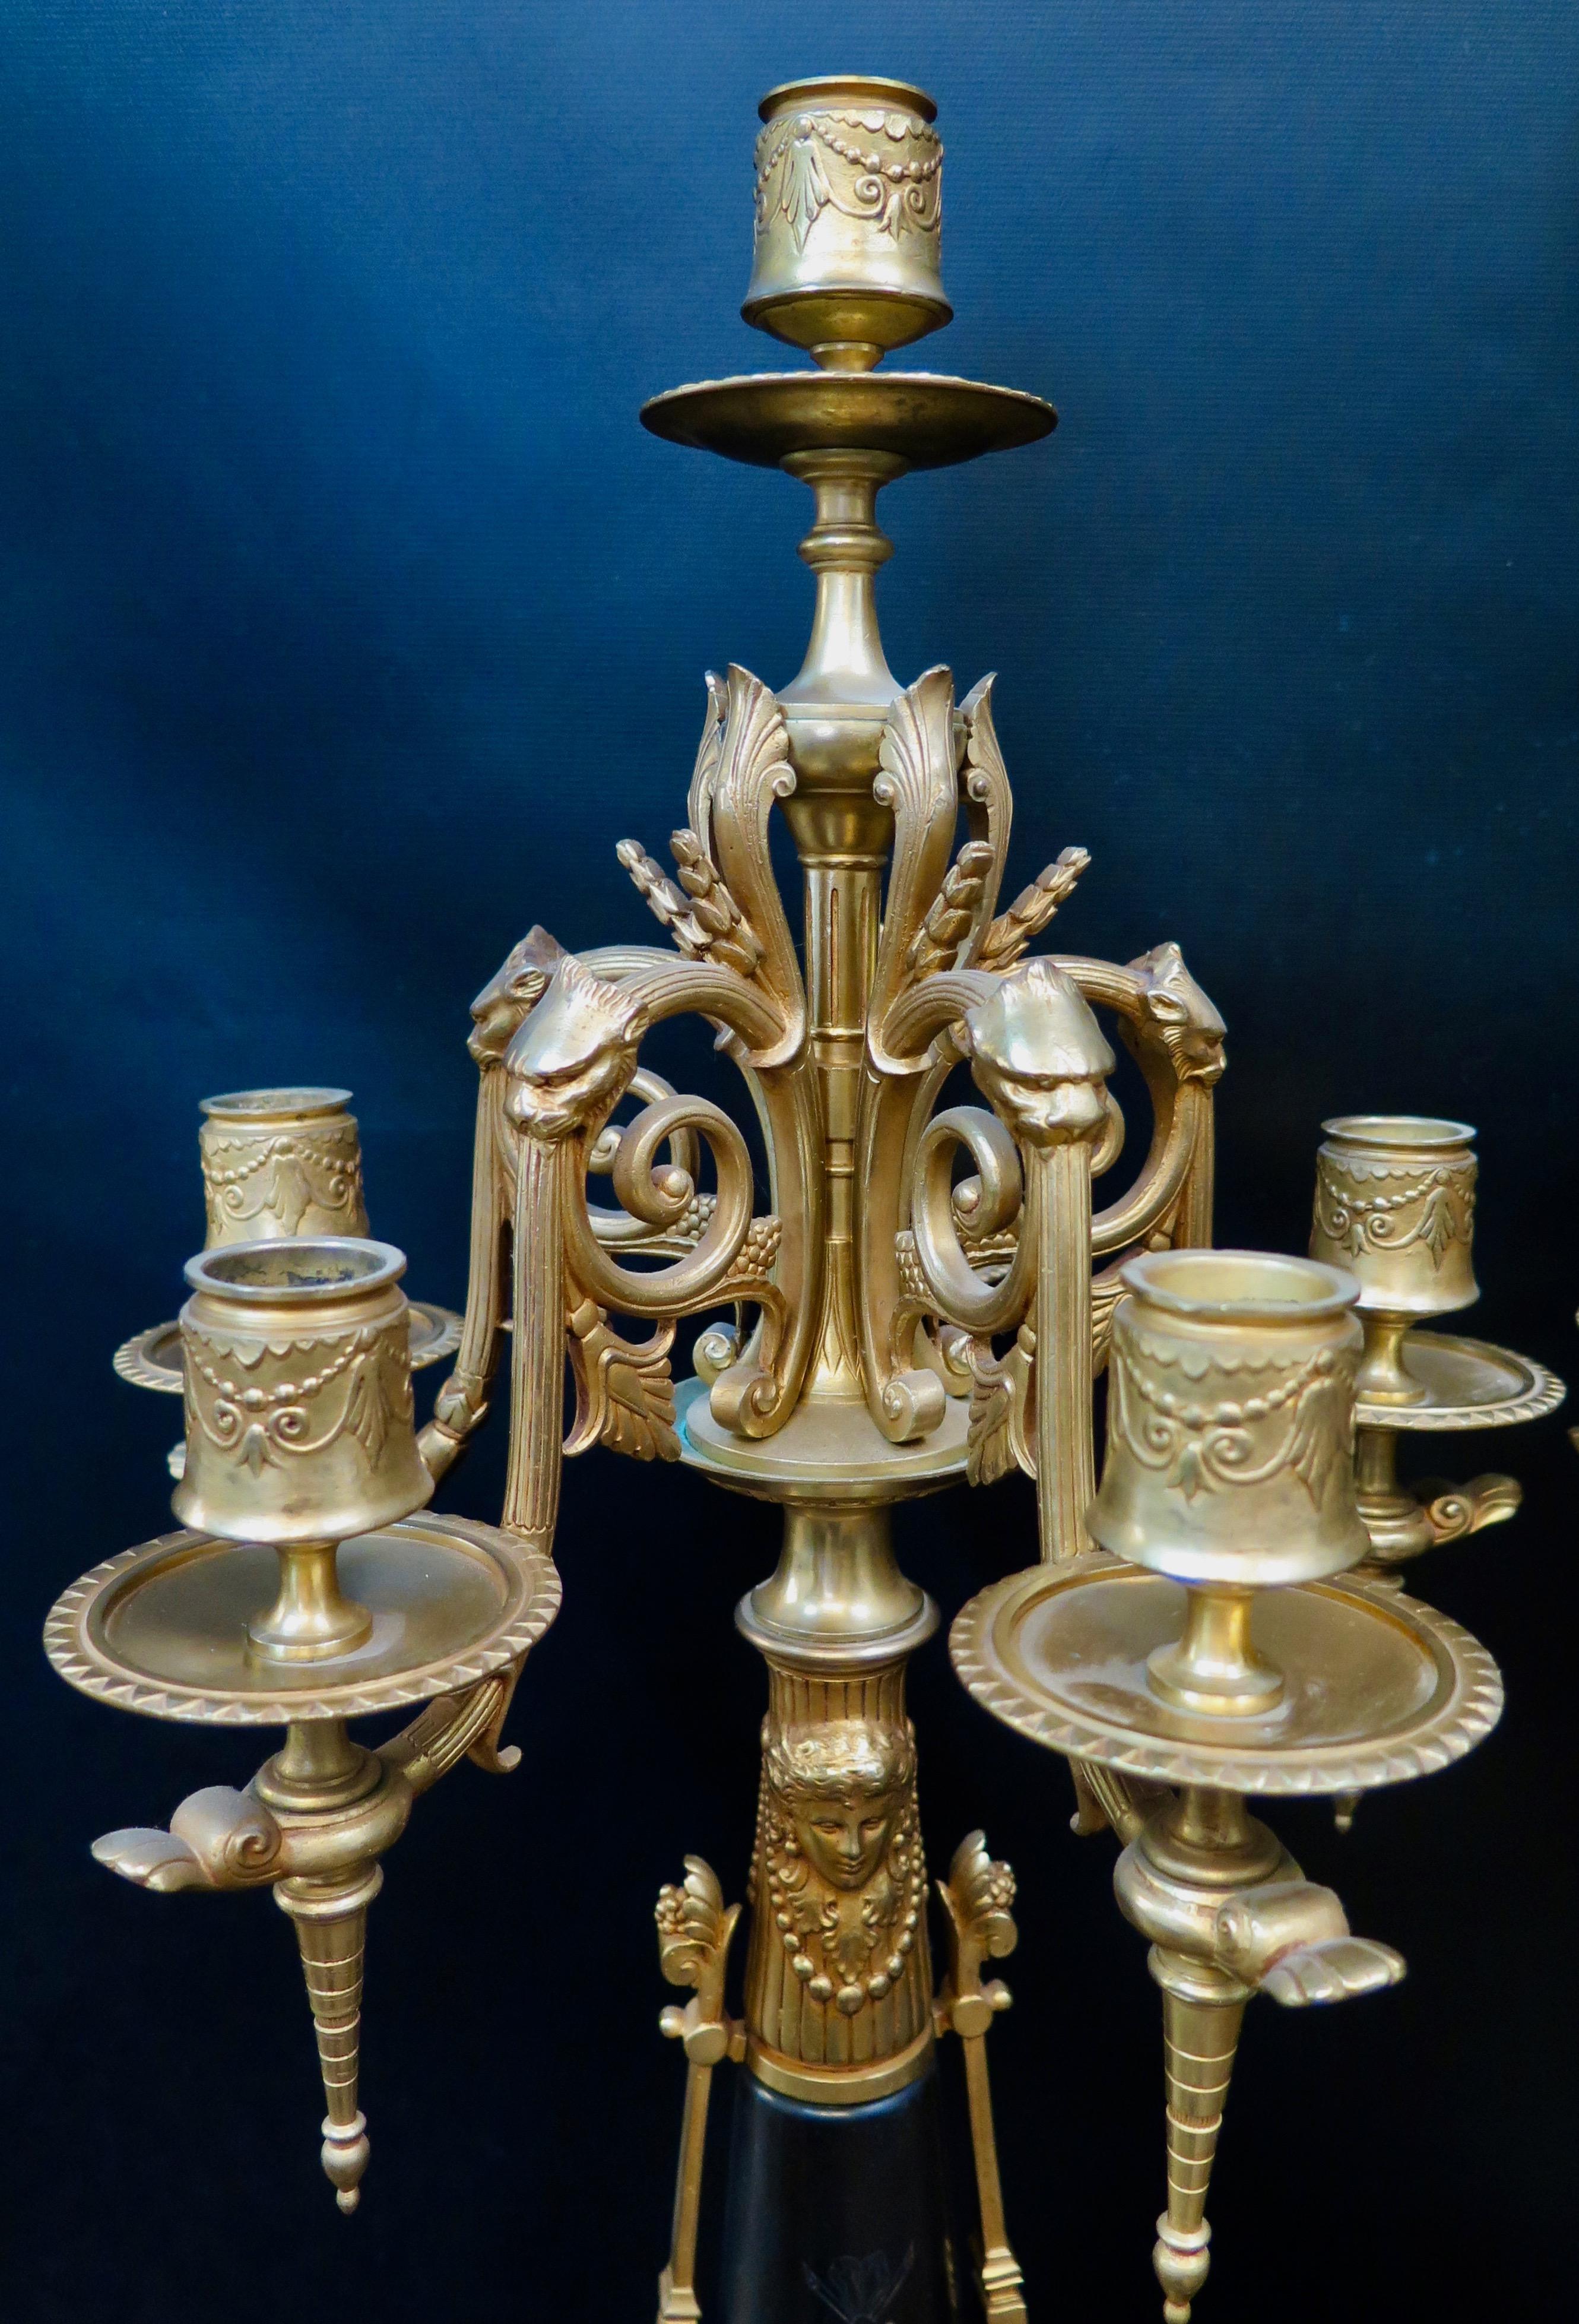 This pair of dramatic and decorative French more bronze and marble candelabra date from the late 19th century and, clearly, were influenced by the artisans of the Victorian period. These five arm candelabra feature an elegant neoclassical design,